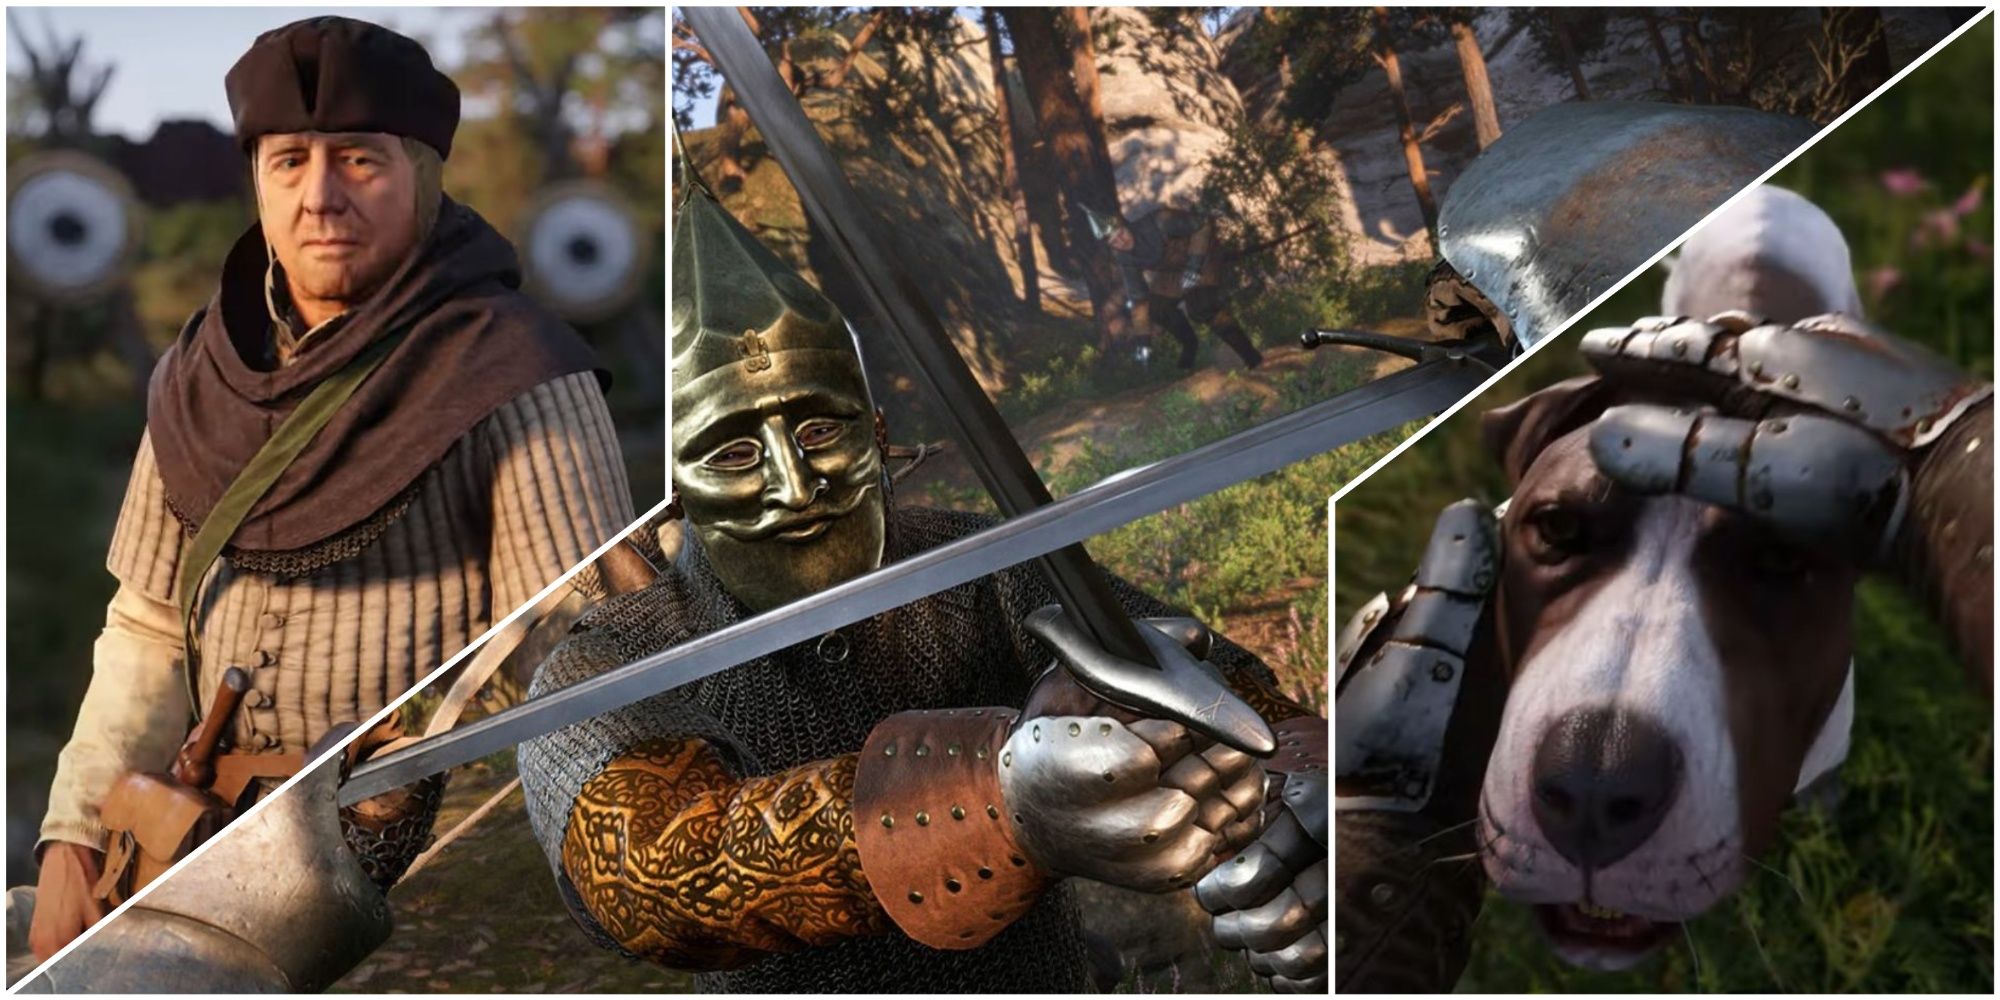 Small Details From The Kingdom Come: Deliverance 2 Trailer